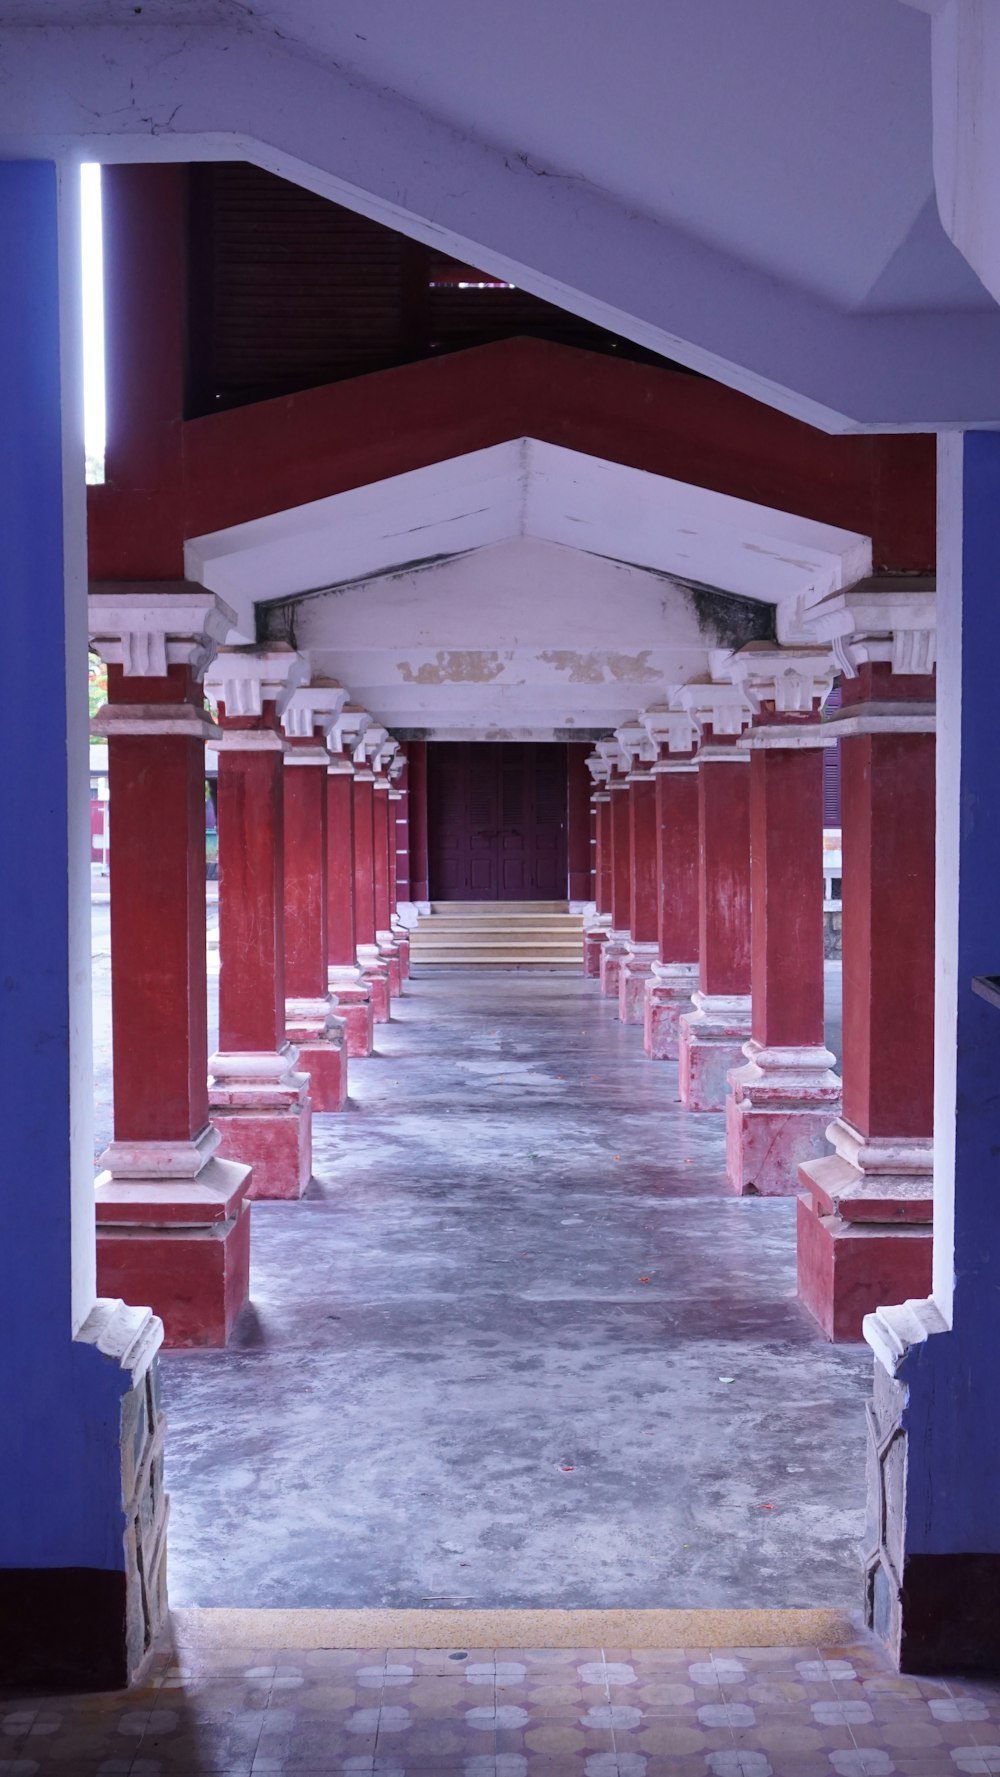 a long hallway with red pillars and blue walls